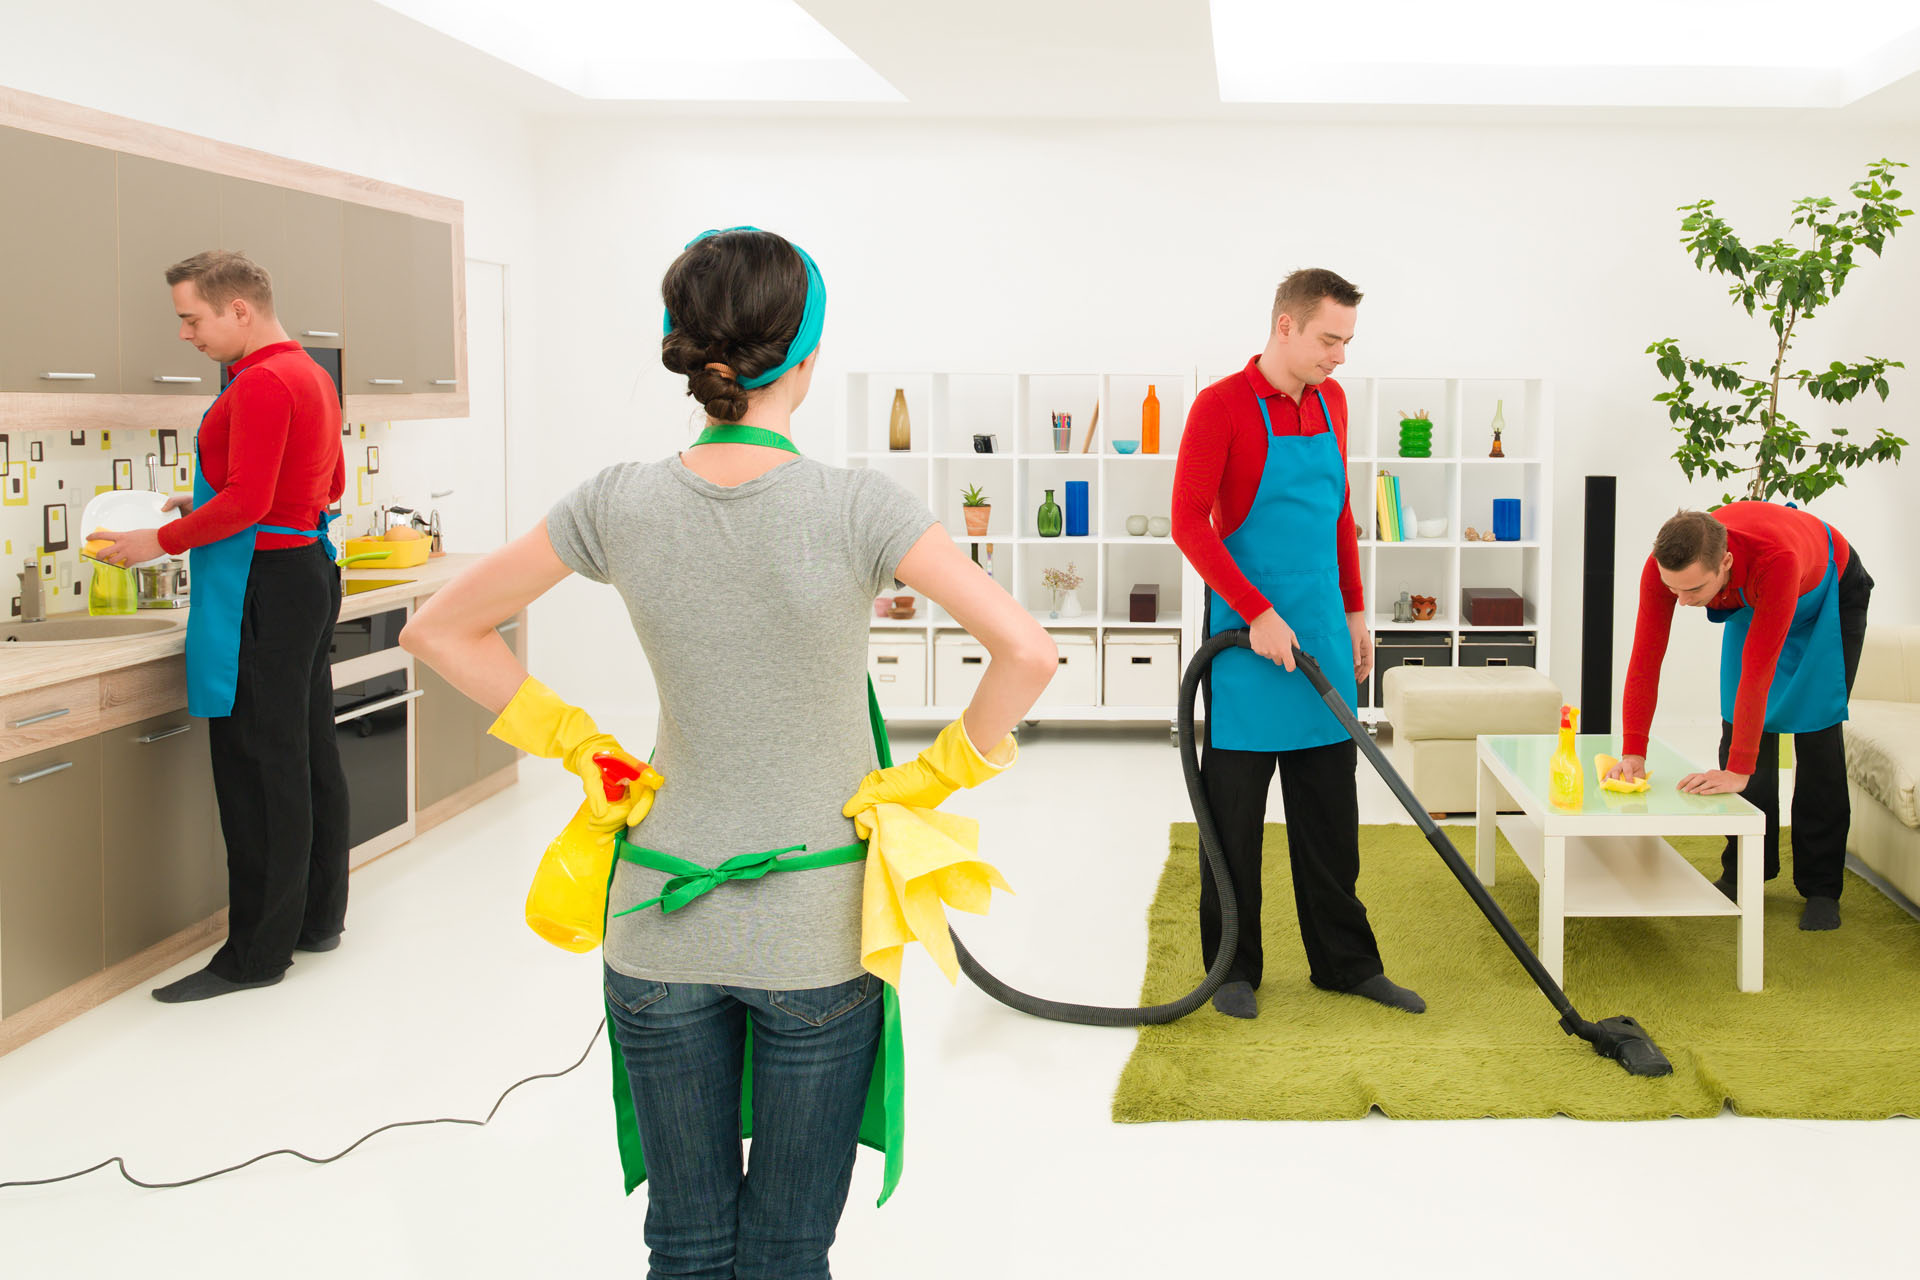 Wondering 'Are There House Cleaning Services Near Me?' We Are the Best